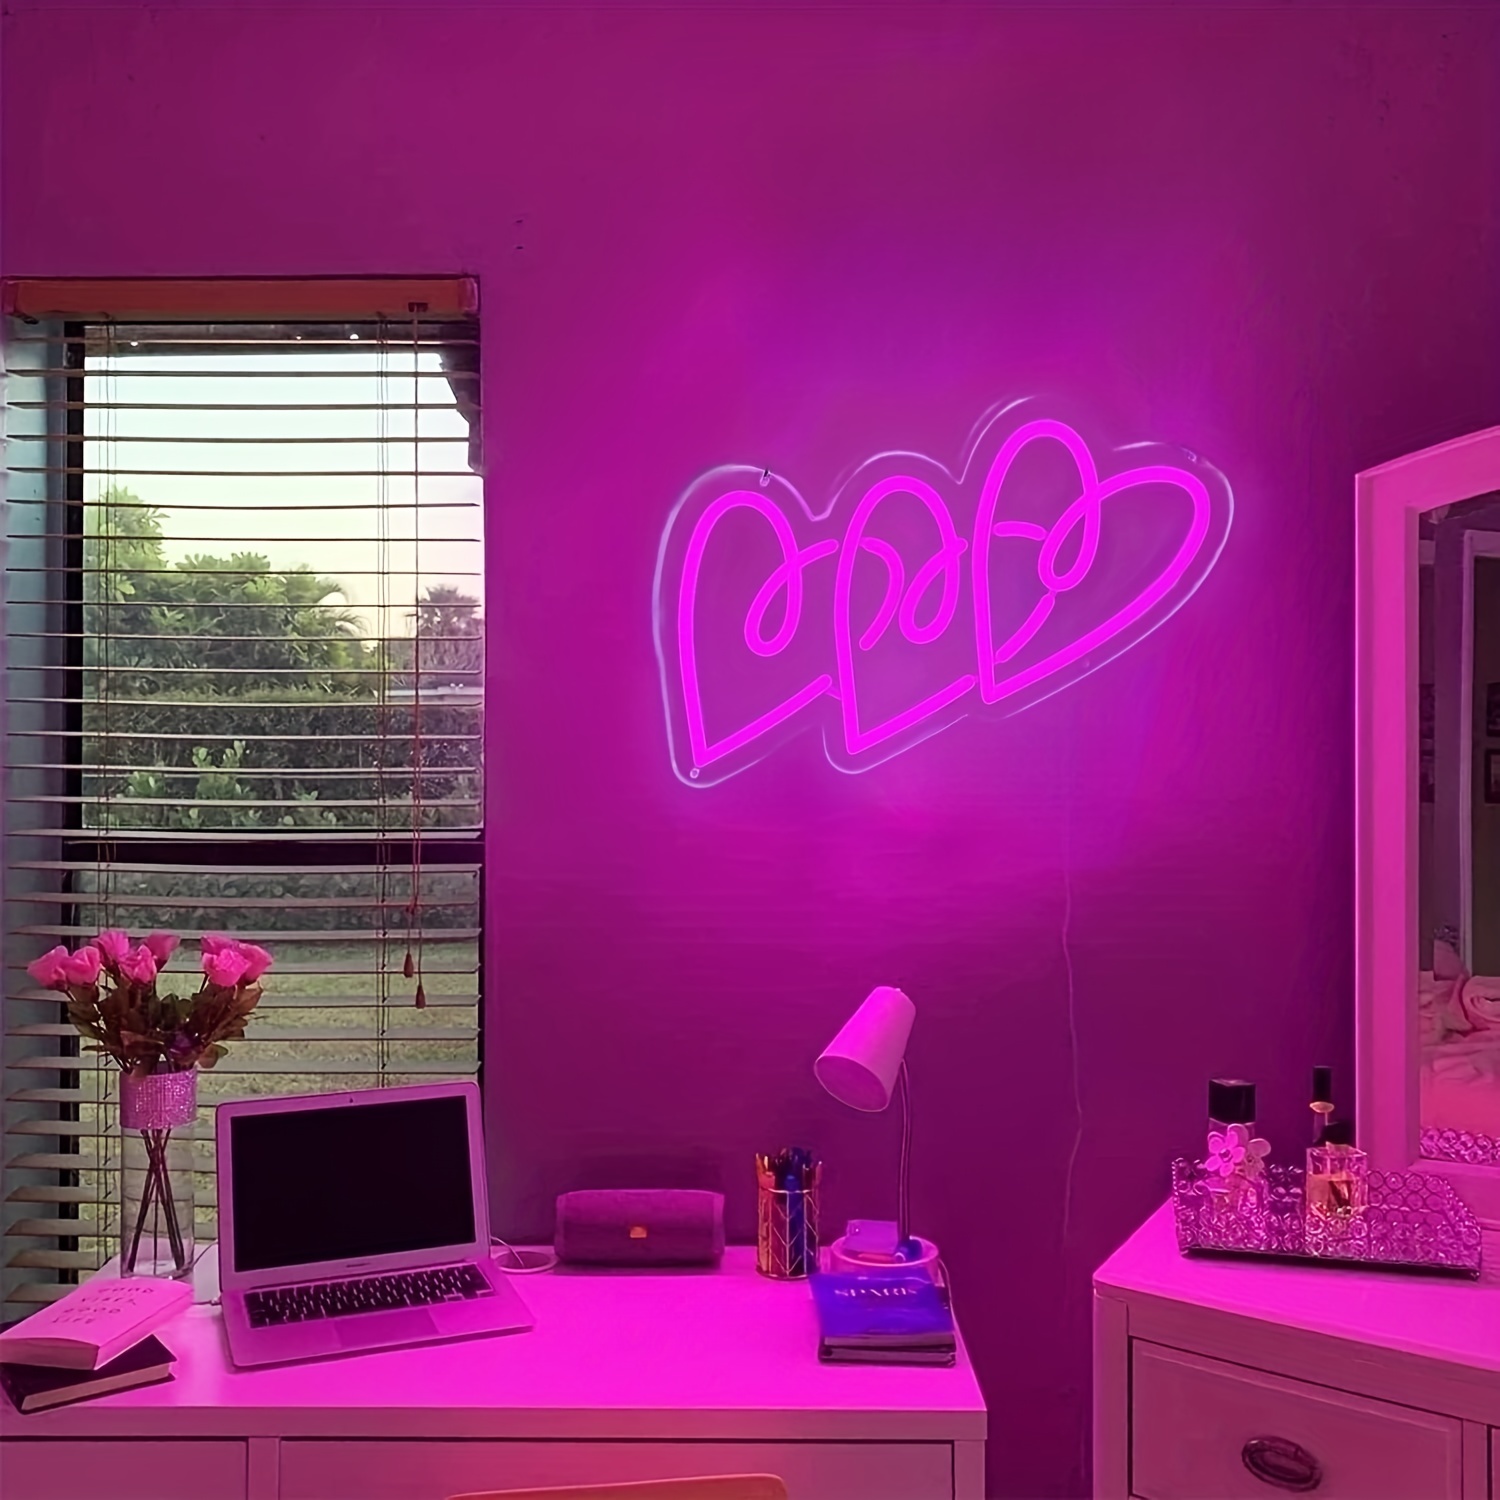 1pc Game Time LED Neon Sign, USB Powered LED Neon Light, Decorative LED  Atmosphere Lights For Wedding Birthday Party Holiday Man Cave Bar Bedroom  Game